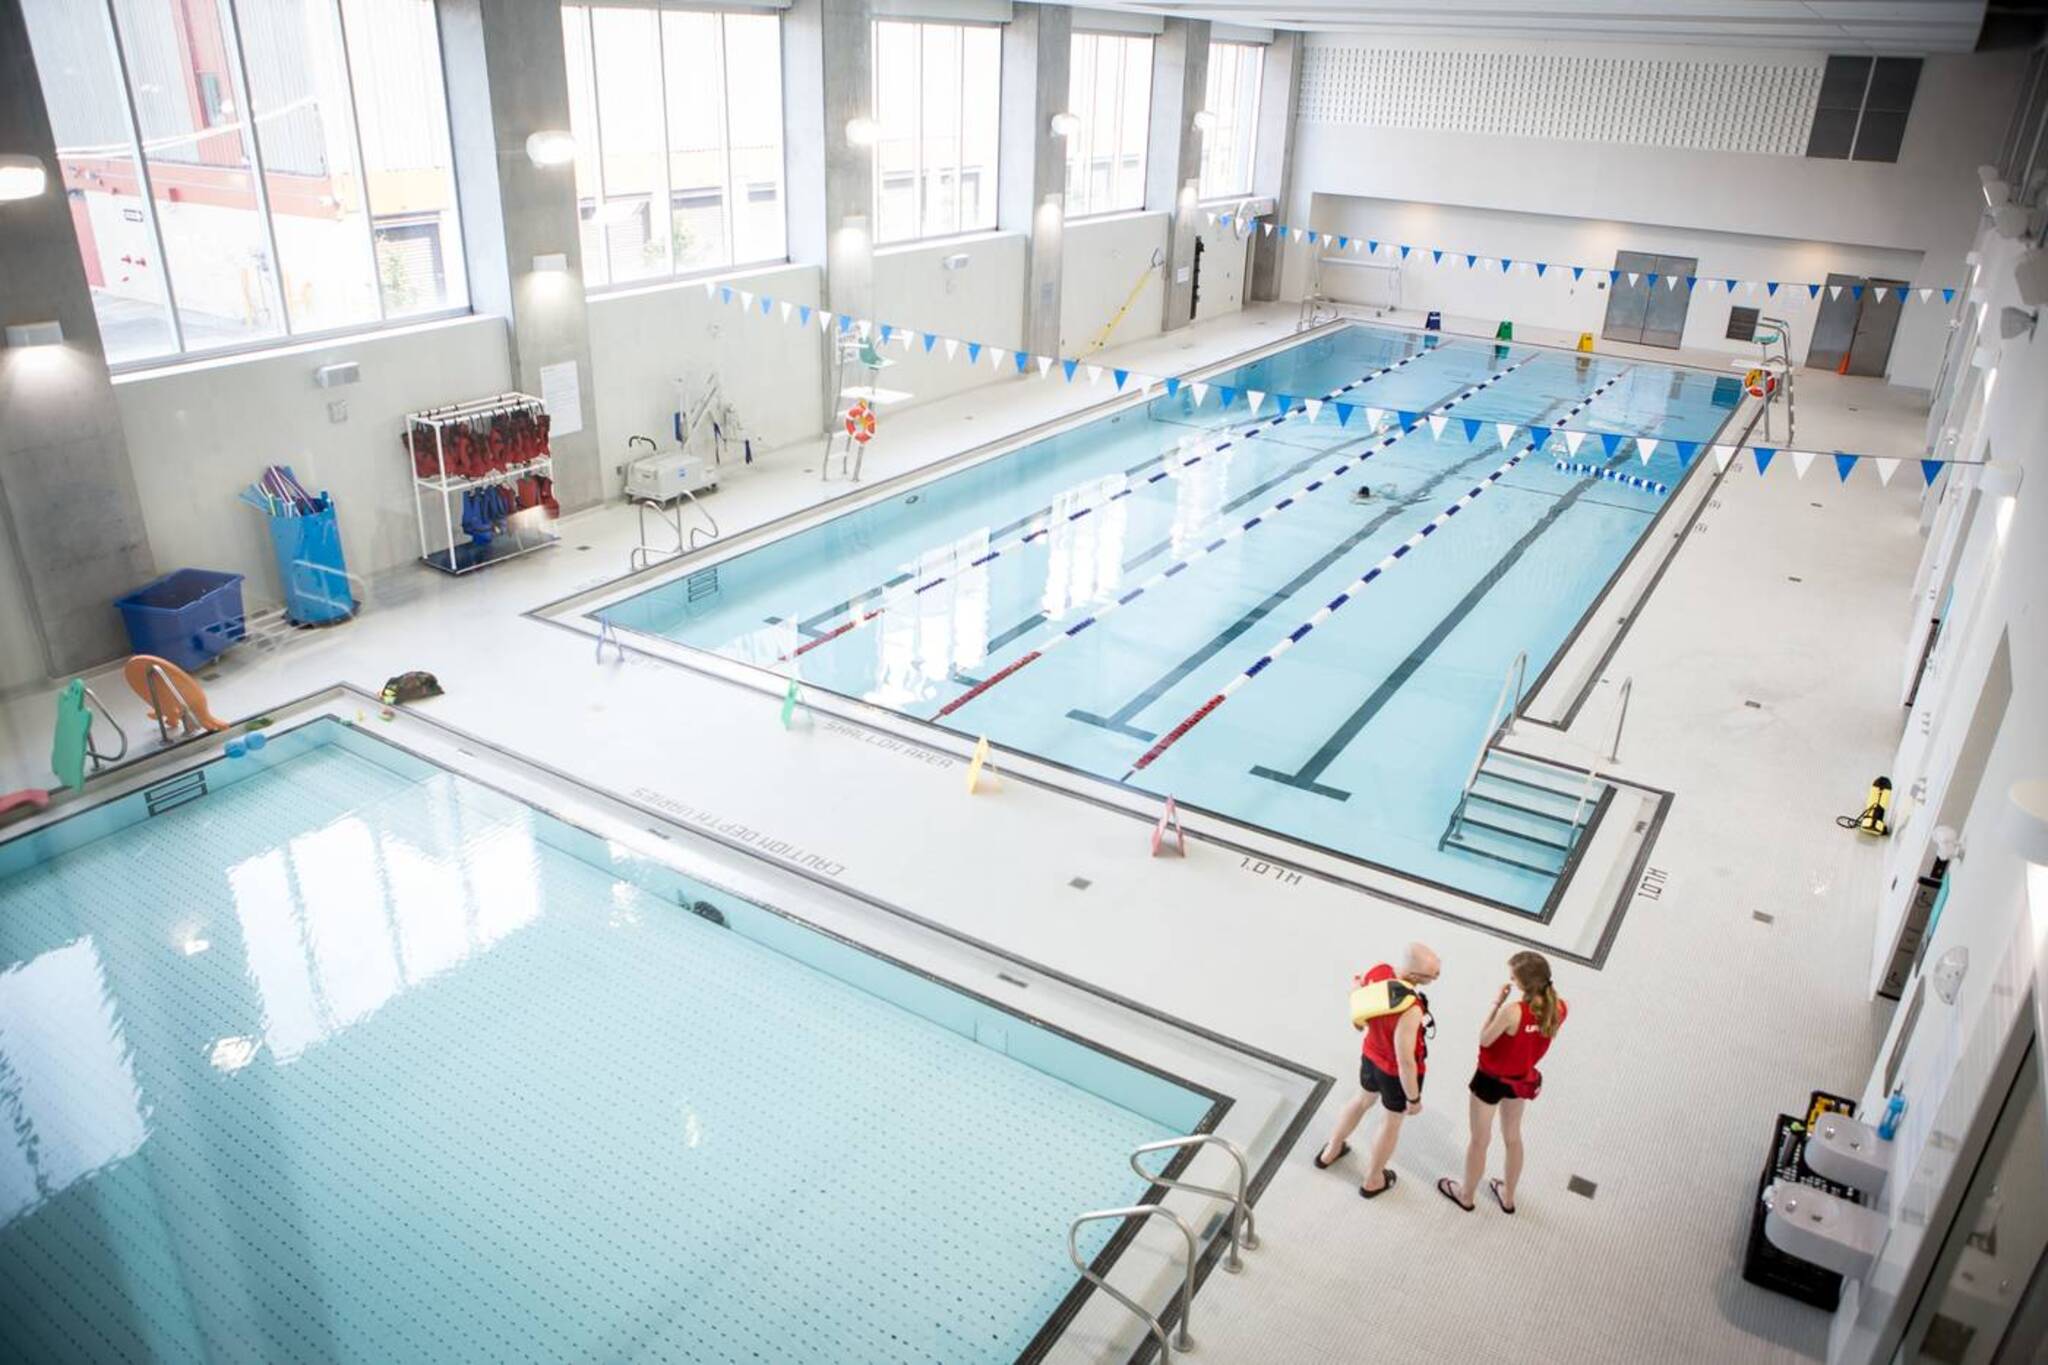 Canada's Most Incredible Indoor Swimming Pools - Toronto Pool